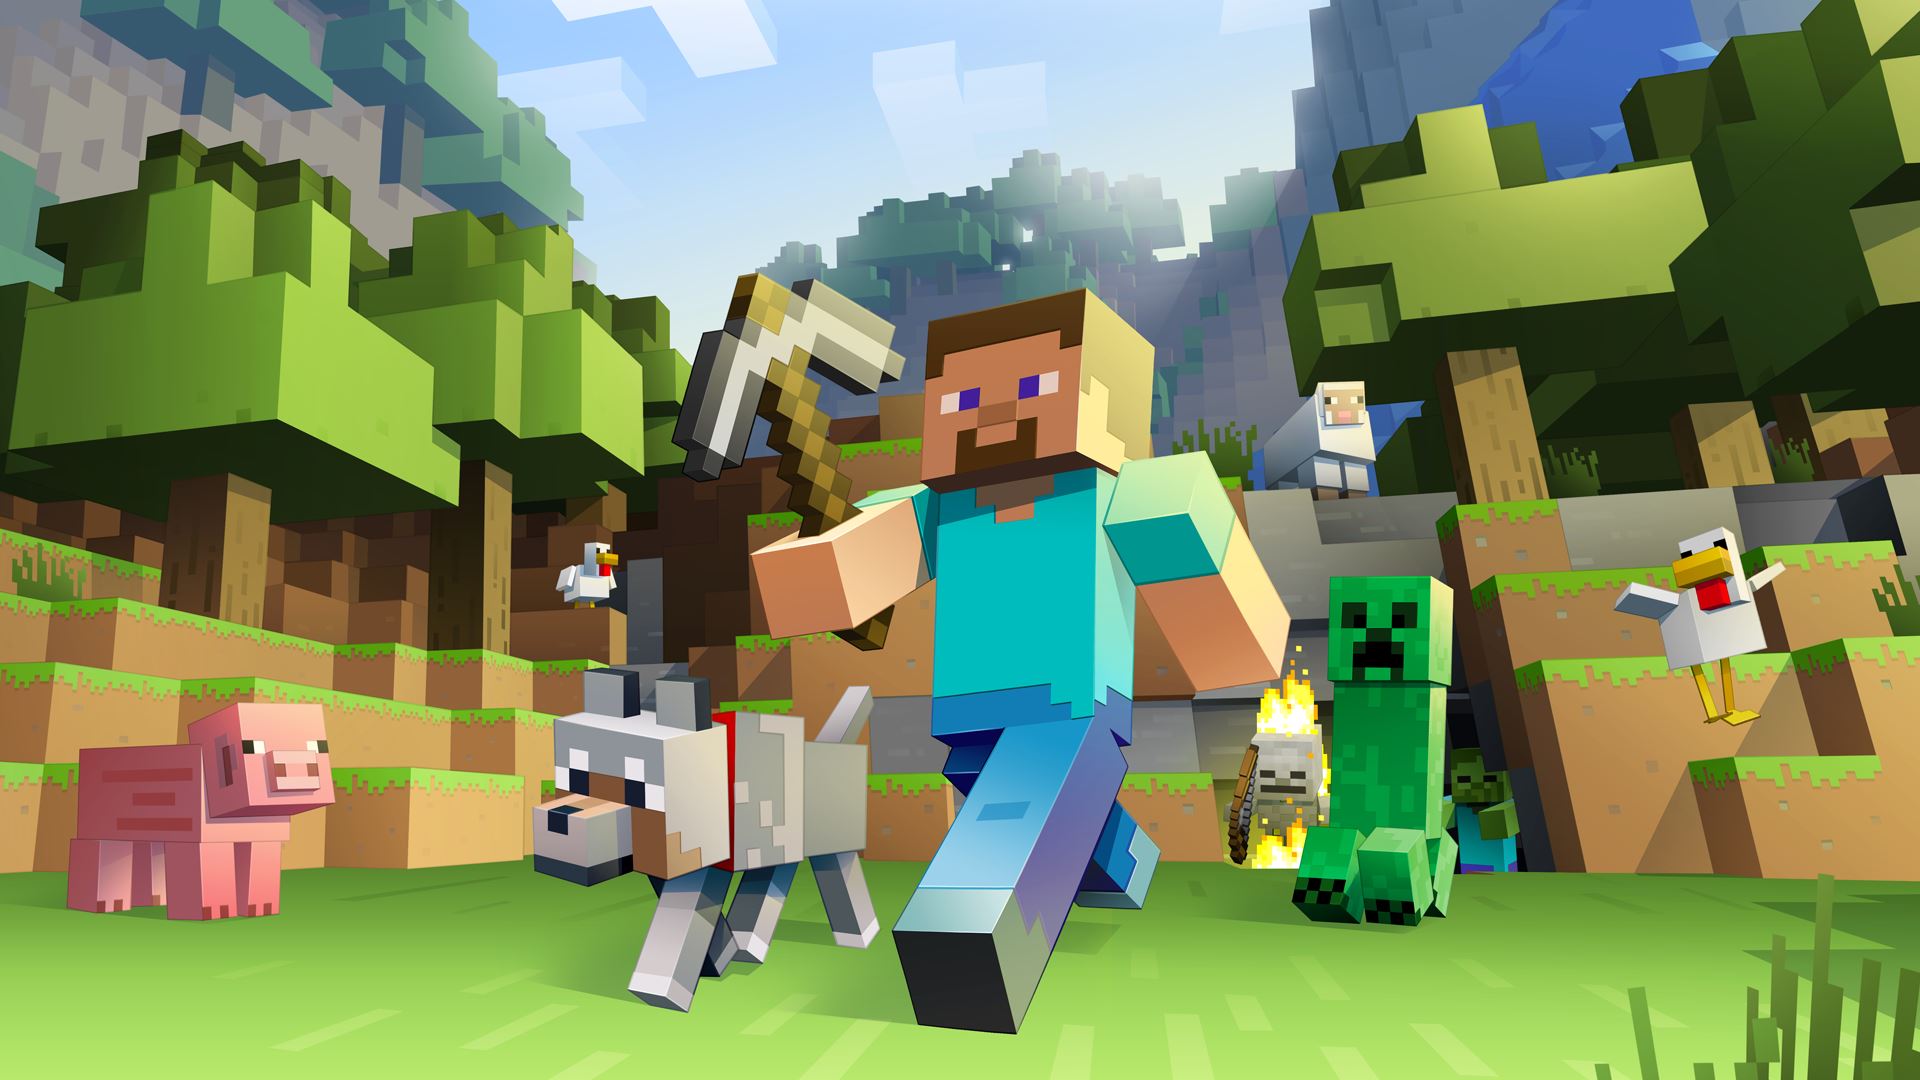 AI can now play Minecraft just as well as you – here’s why that matters